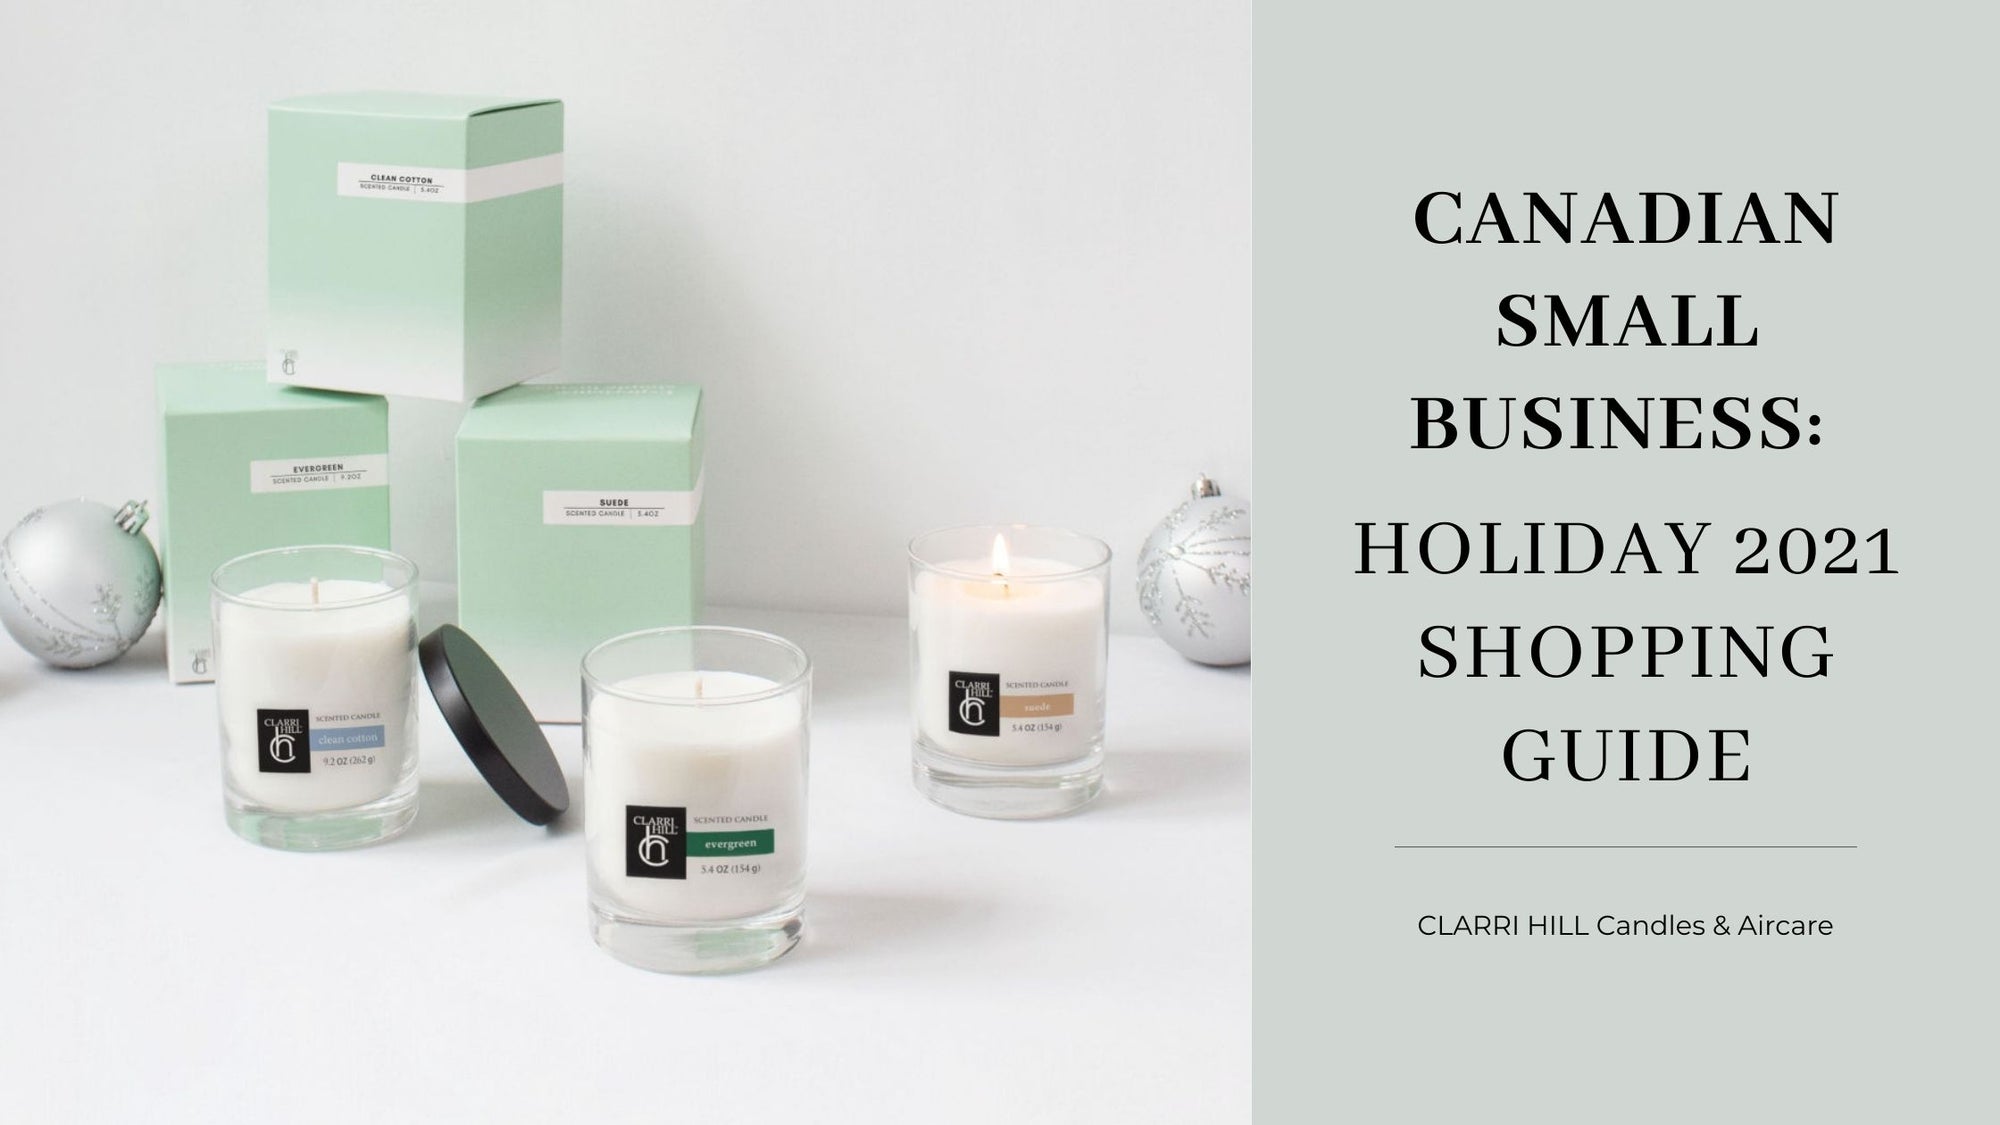 Canadian Small Business: Holiday 2021 Shopping Guide